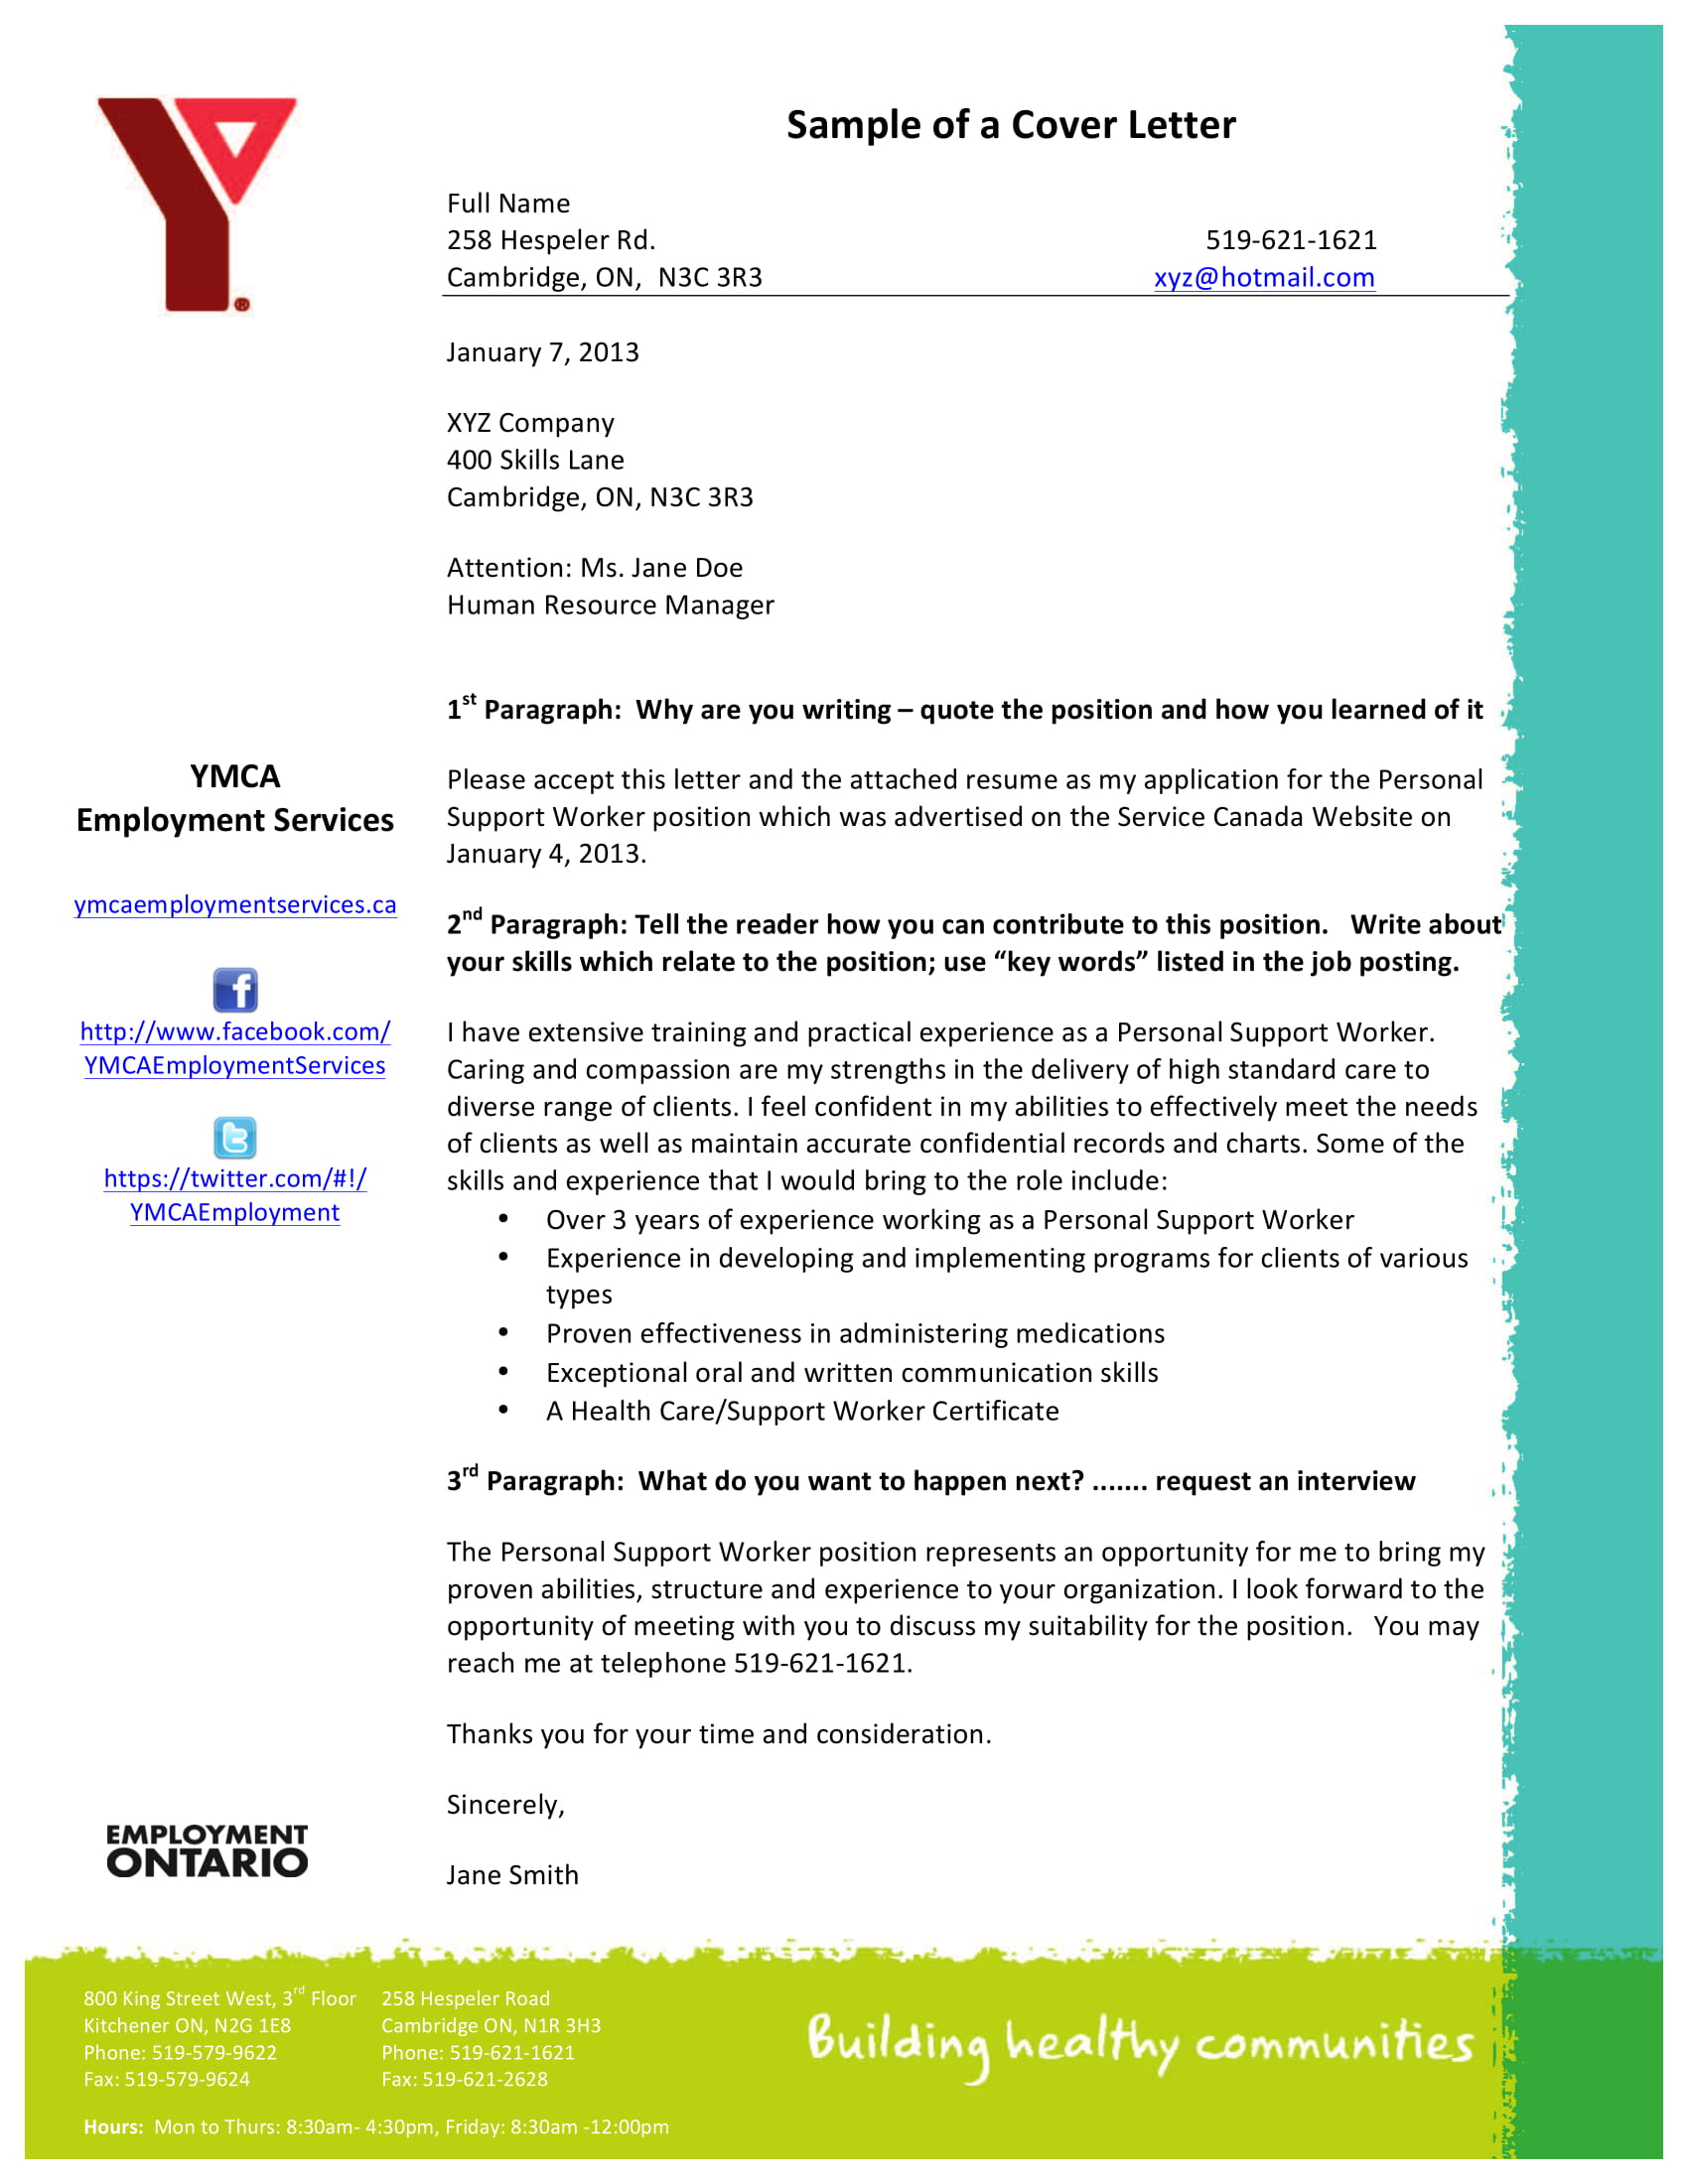 university of essex cover letter template